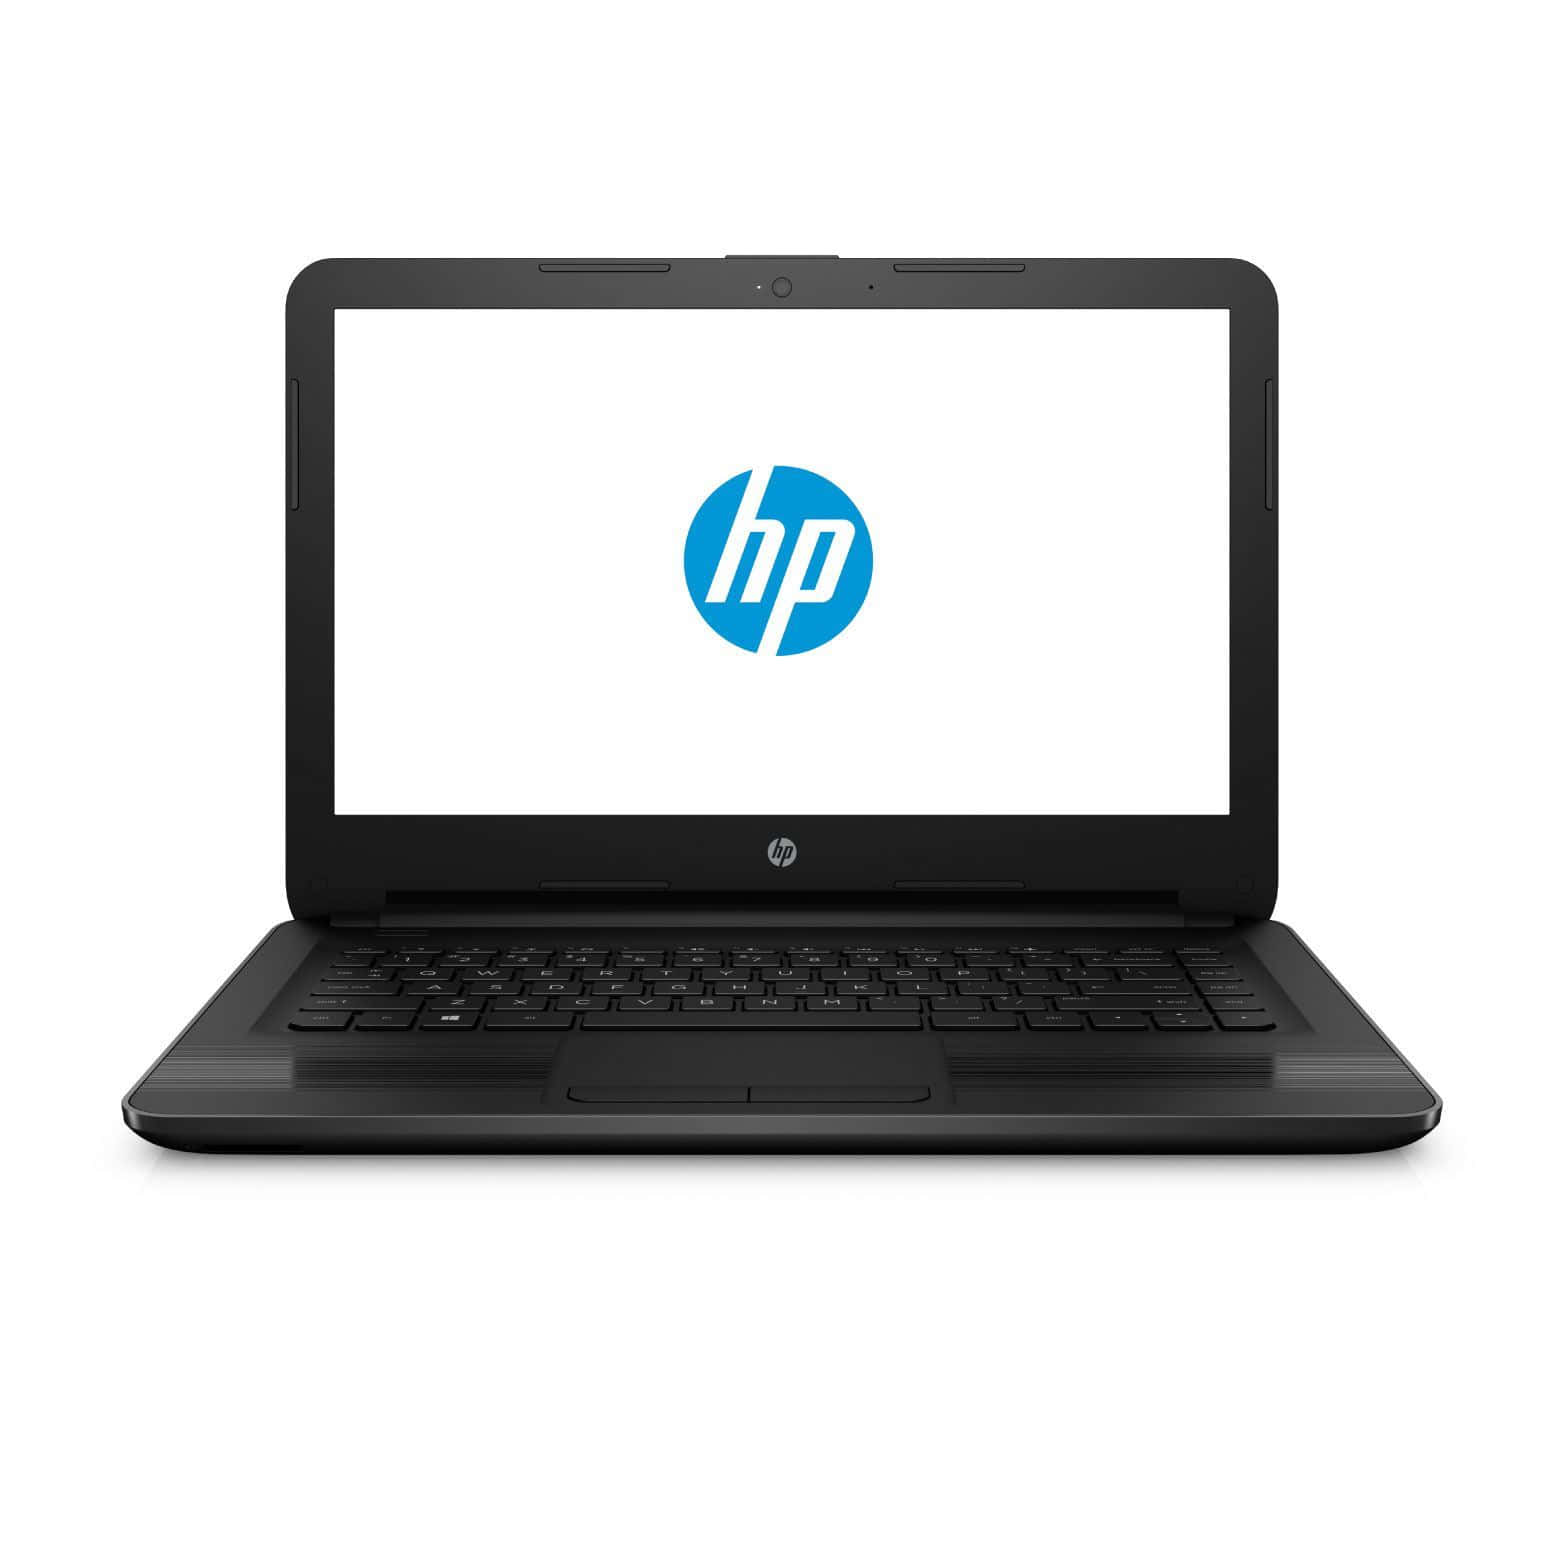 Experience seamless computing with HP